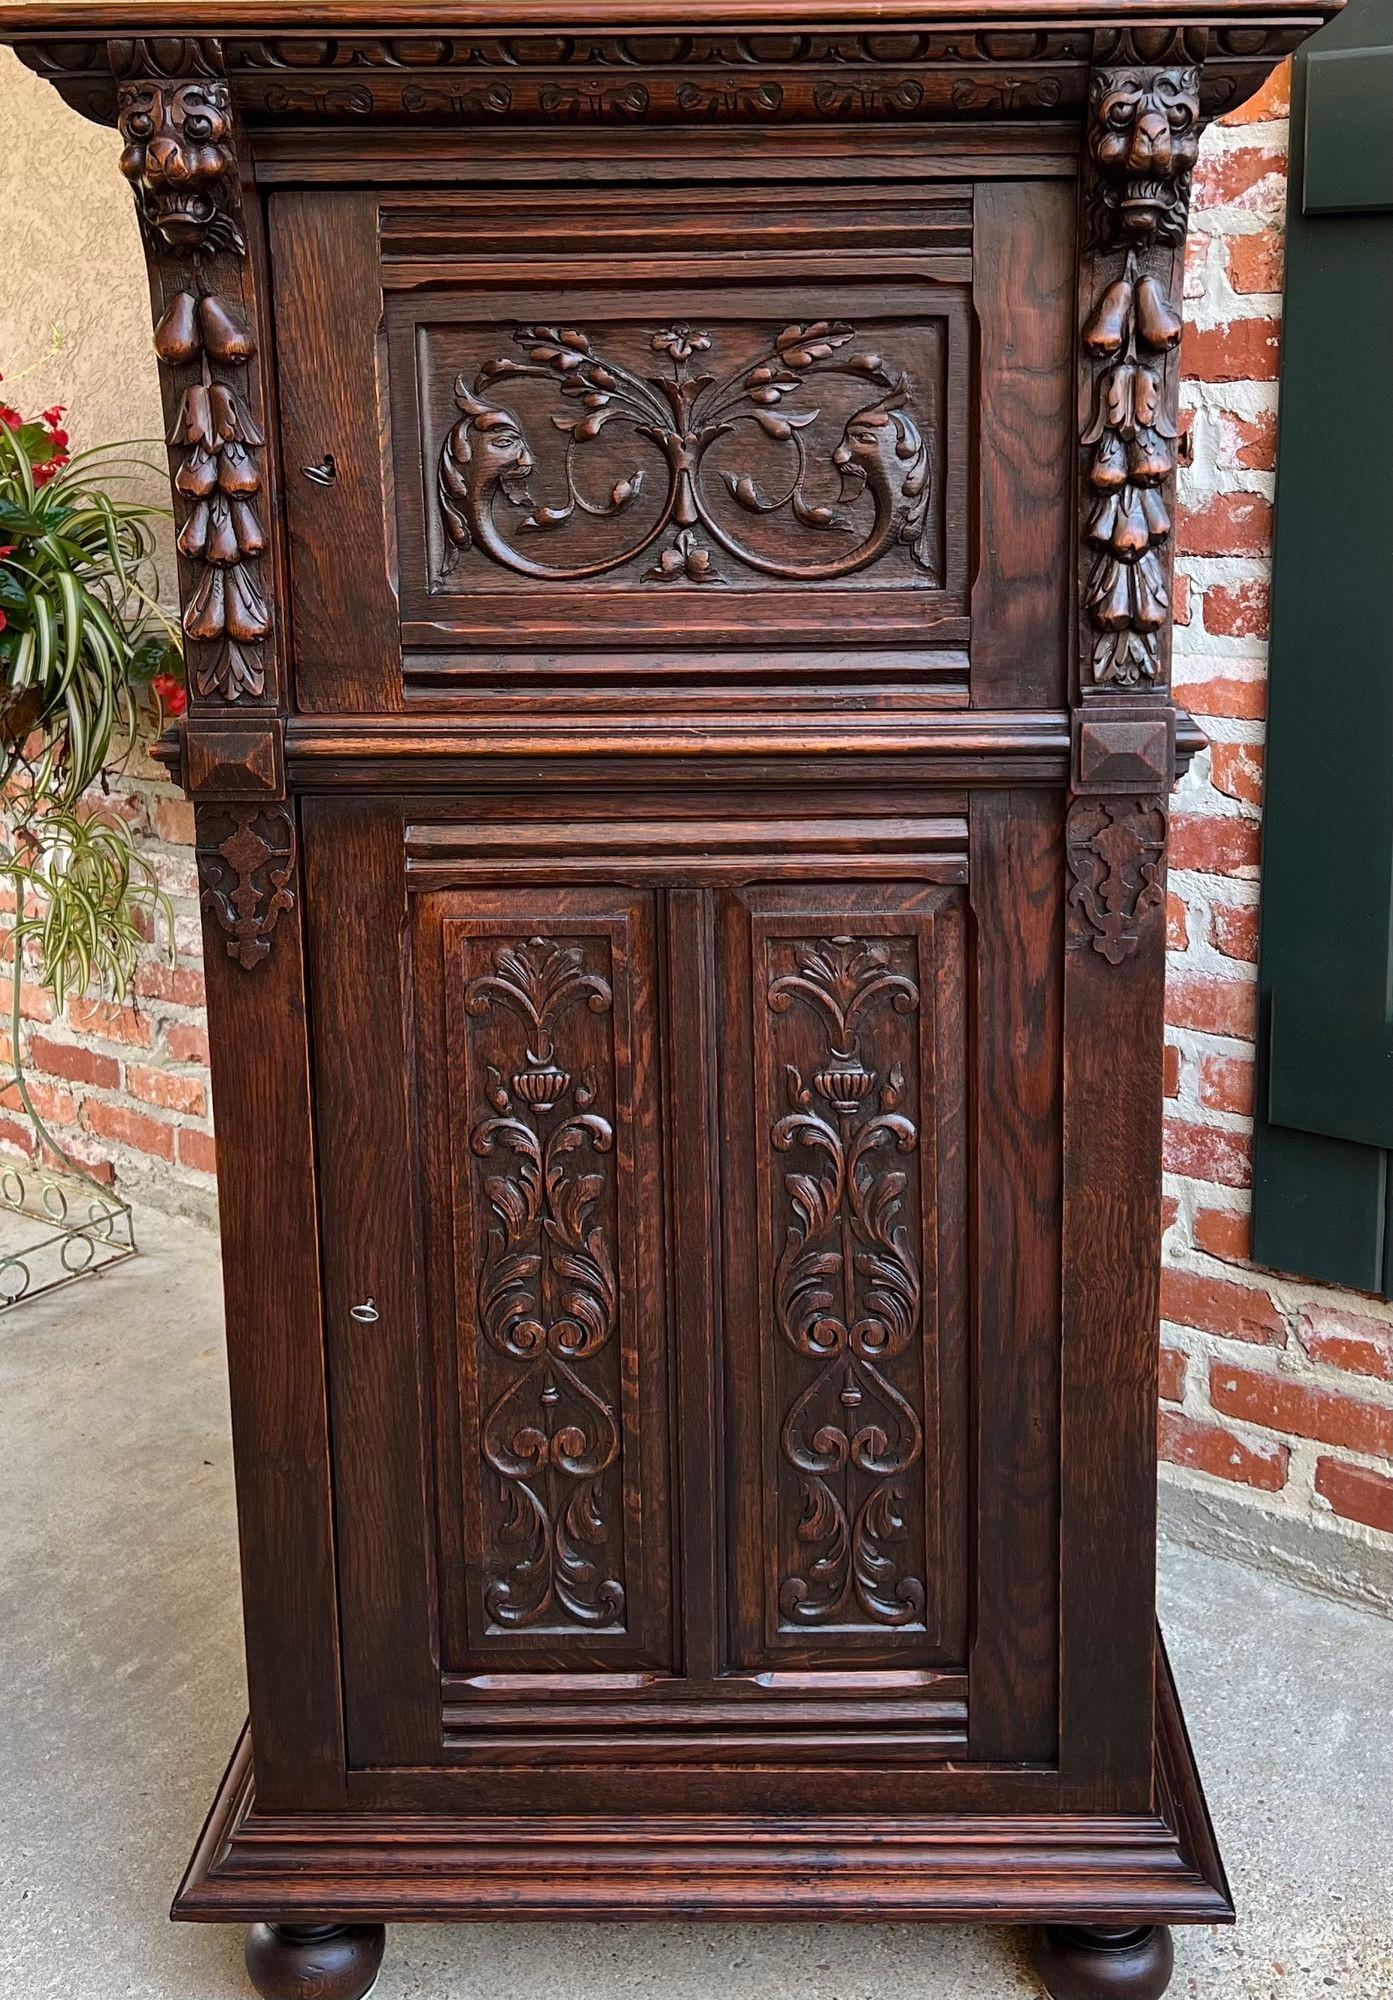 French Provincial Antique French Cabinet Renaissance Carved Oak Bookcase Wine Cellarette Sideboard For Sale